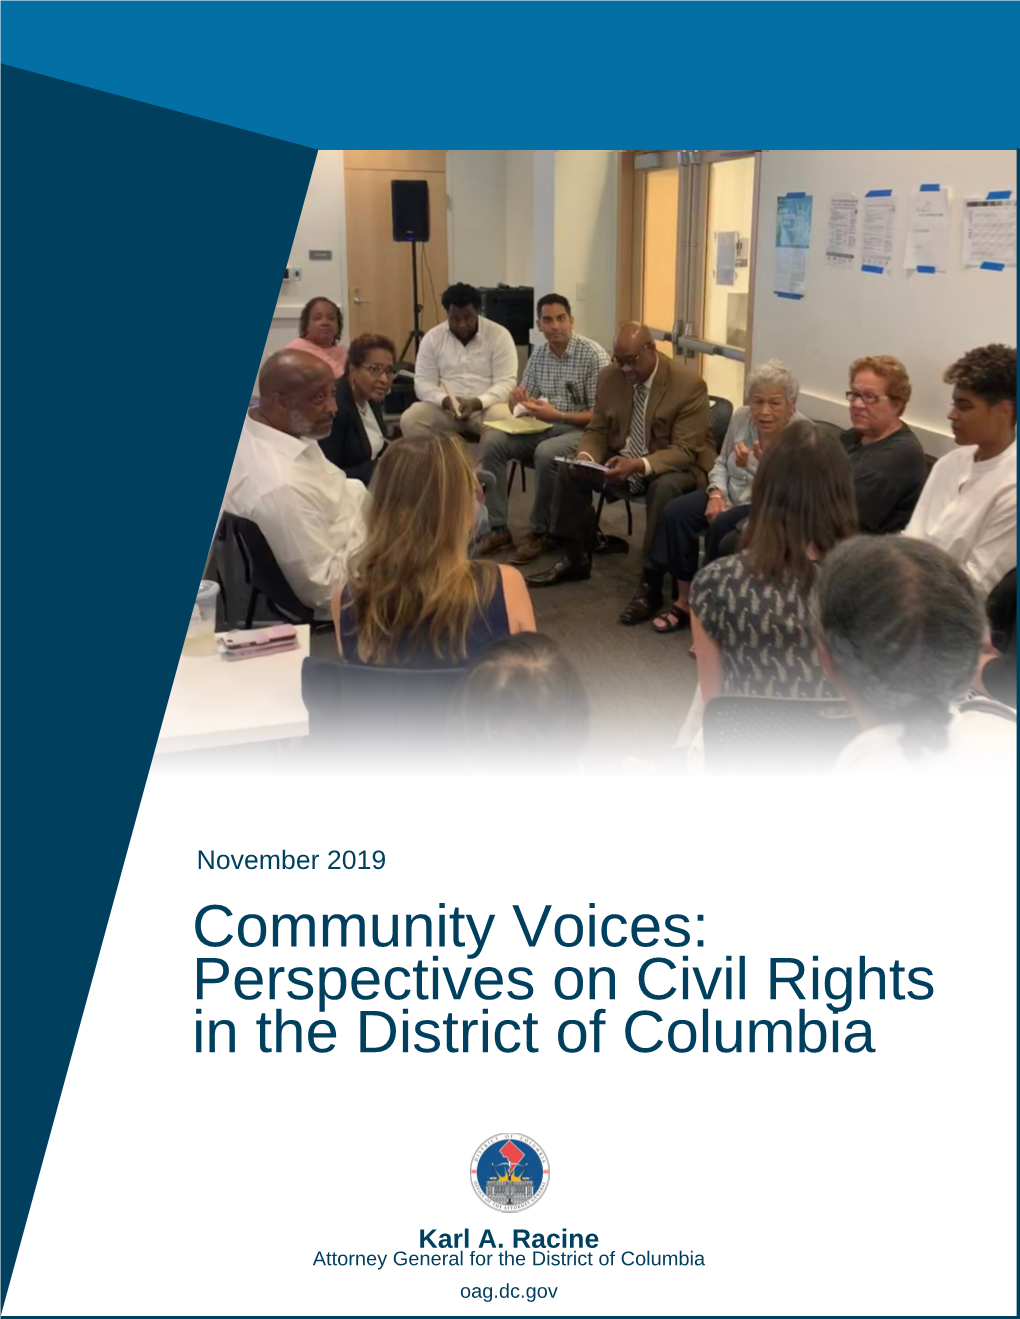 Community Voices: Perspectives on Civil Rights in the District of Columbia